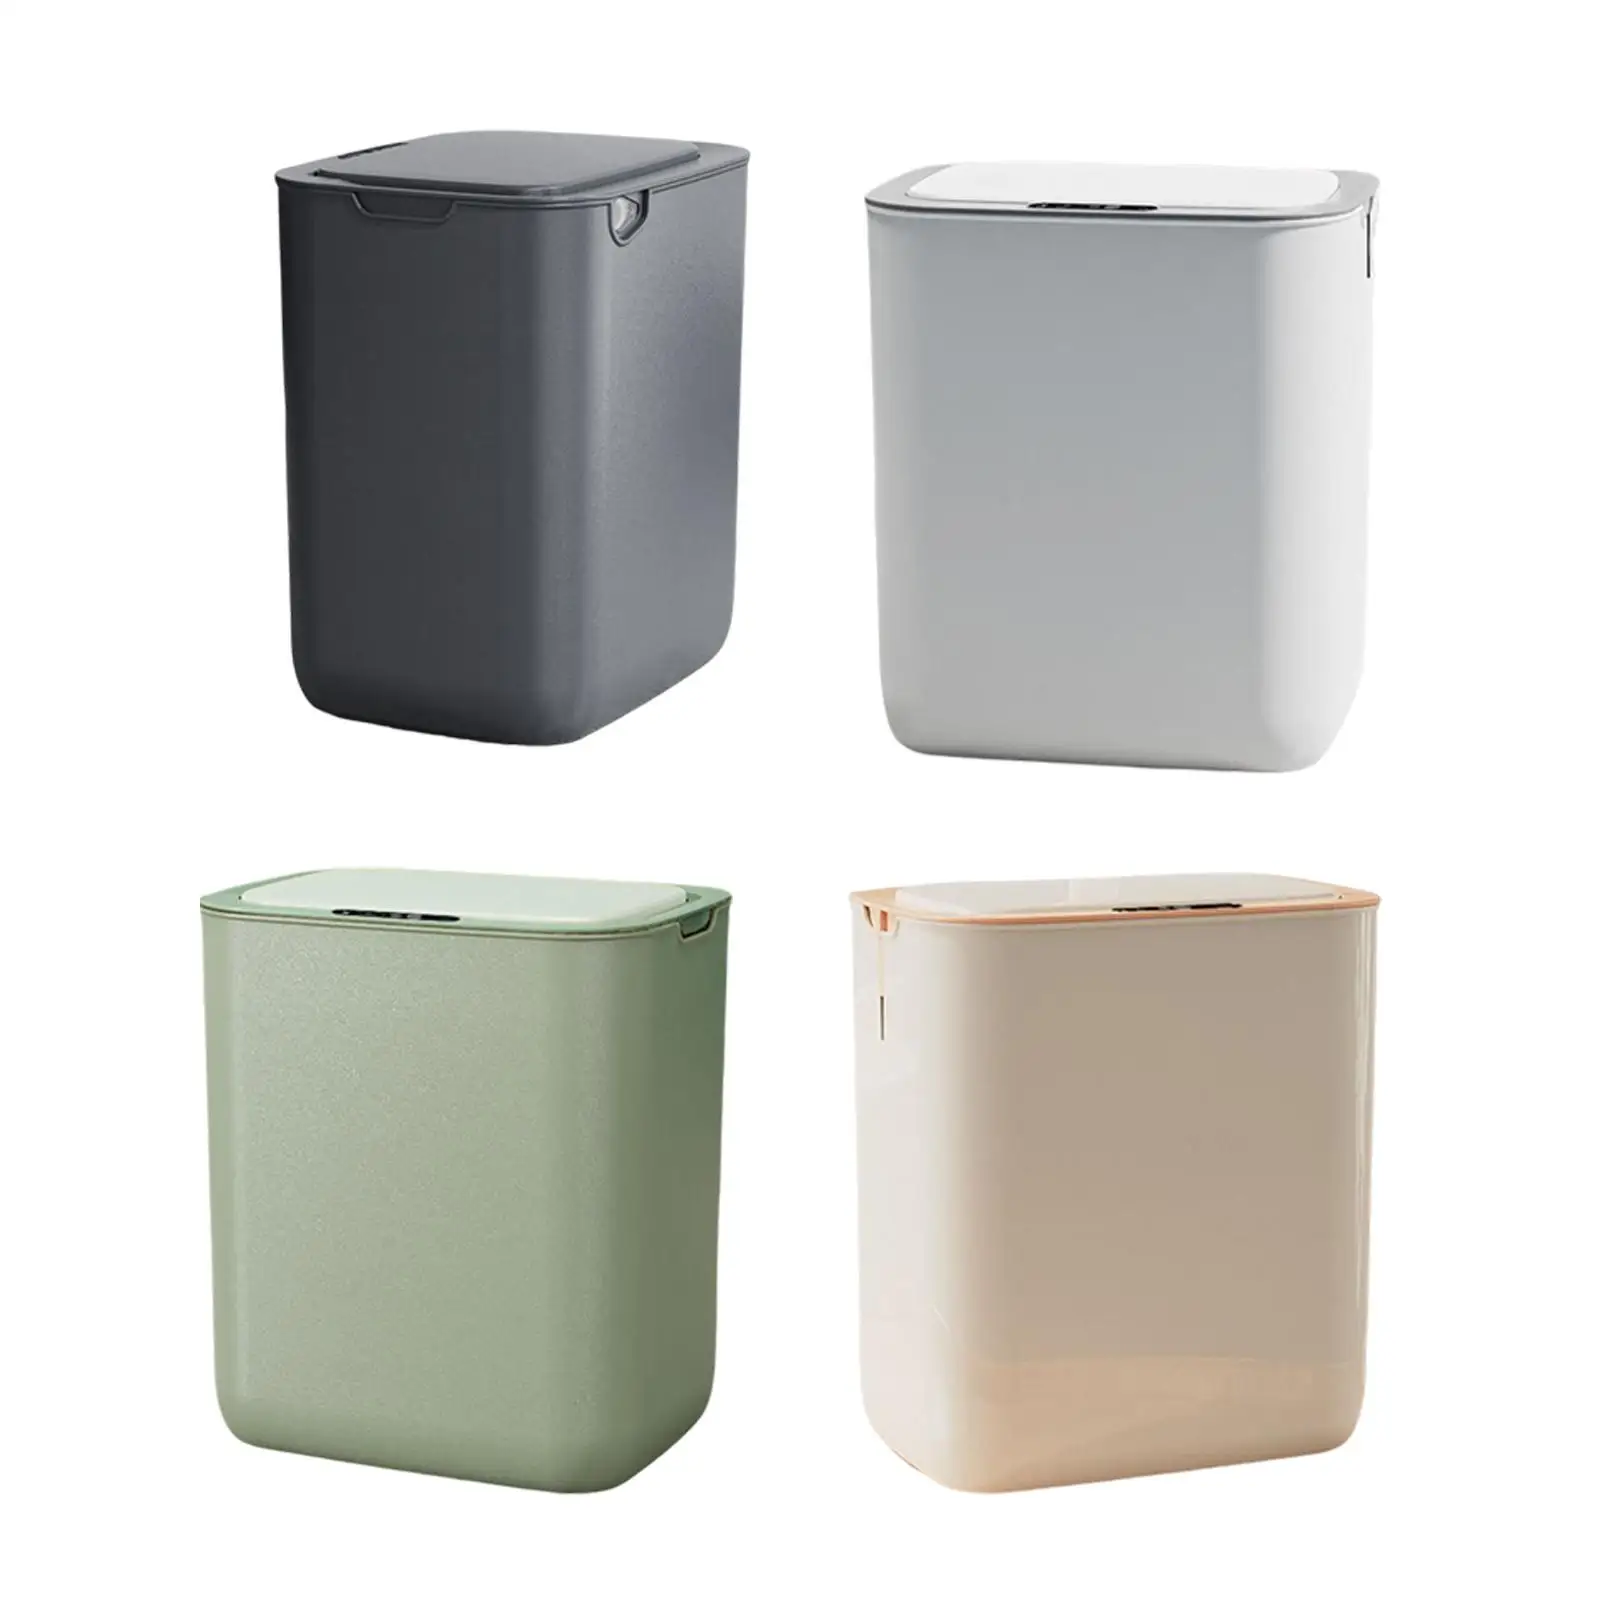 Smart Induction Trash Can Large Capacity Automatic Intelligent Sensor Dustbin for Hotel